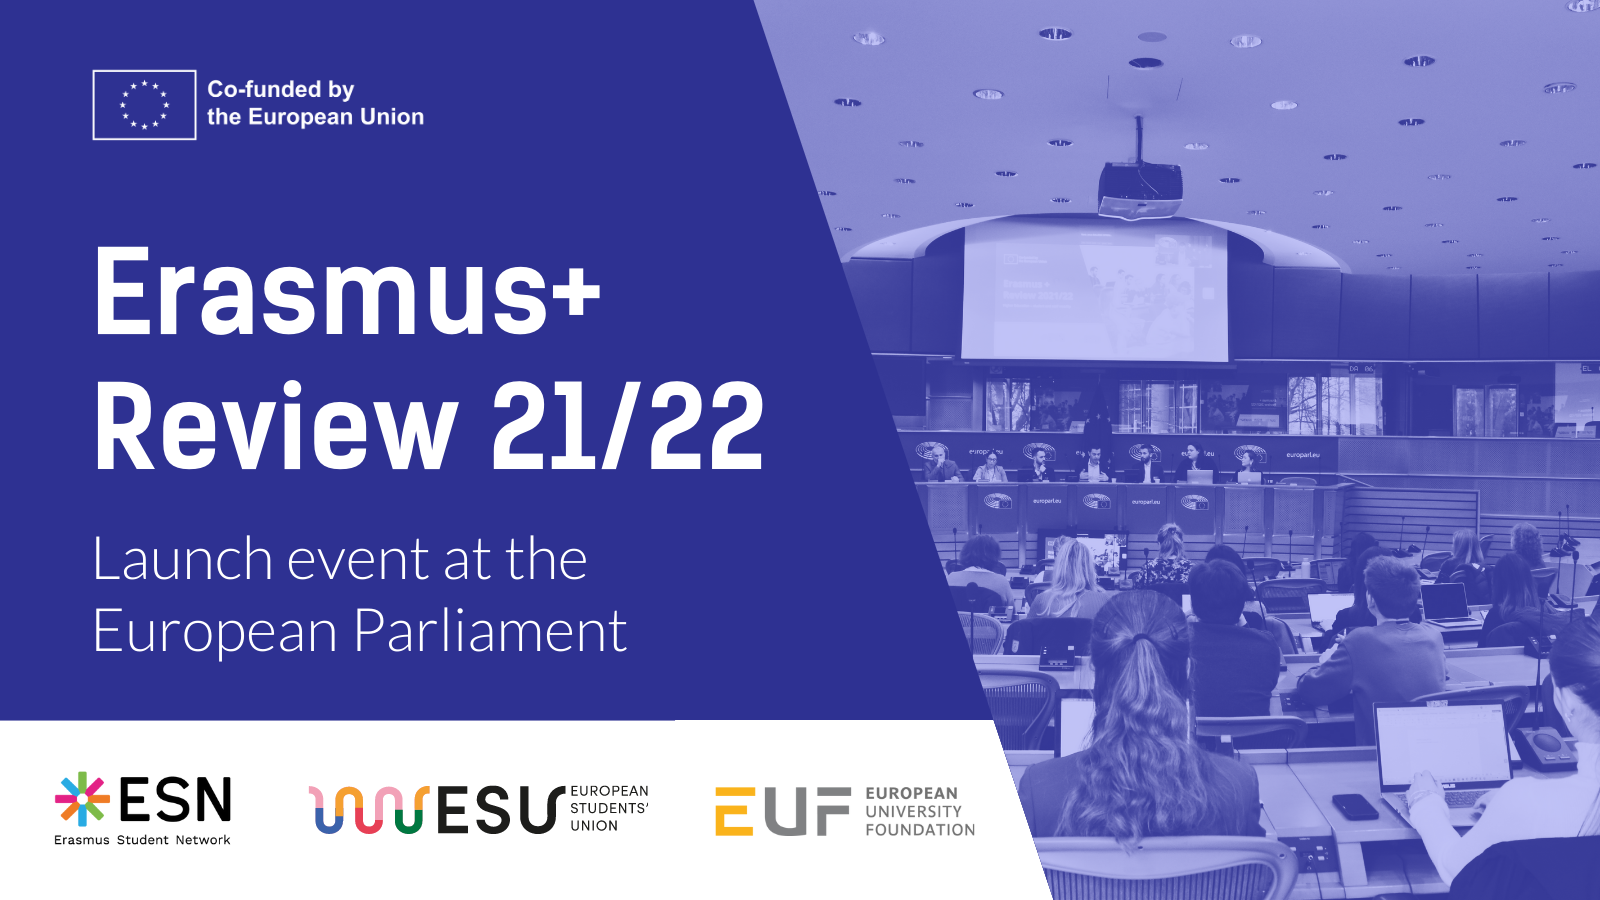 A dark blue visual and a photo from a presentation with blue overlay. The text says: "Erasmus+ Review 21/22. Launch event at the European Parliament".